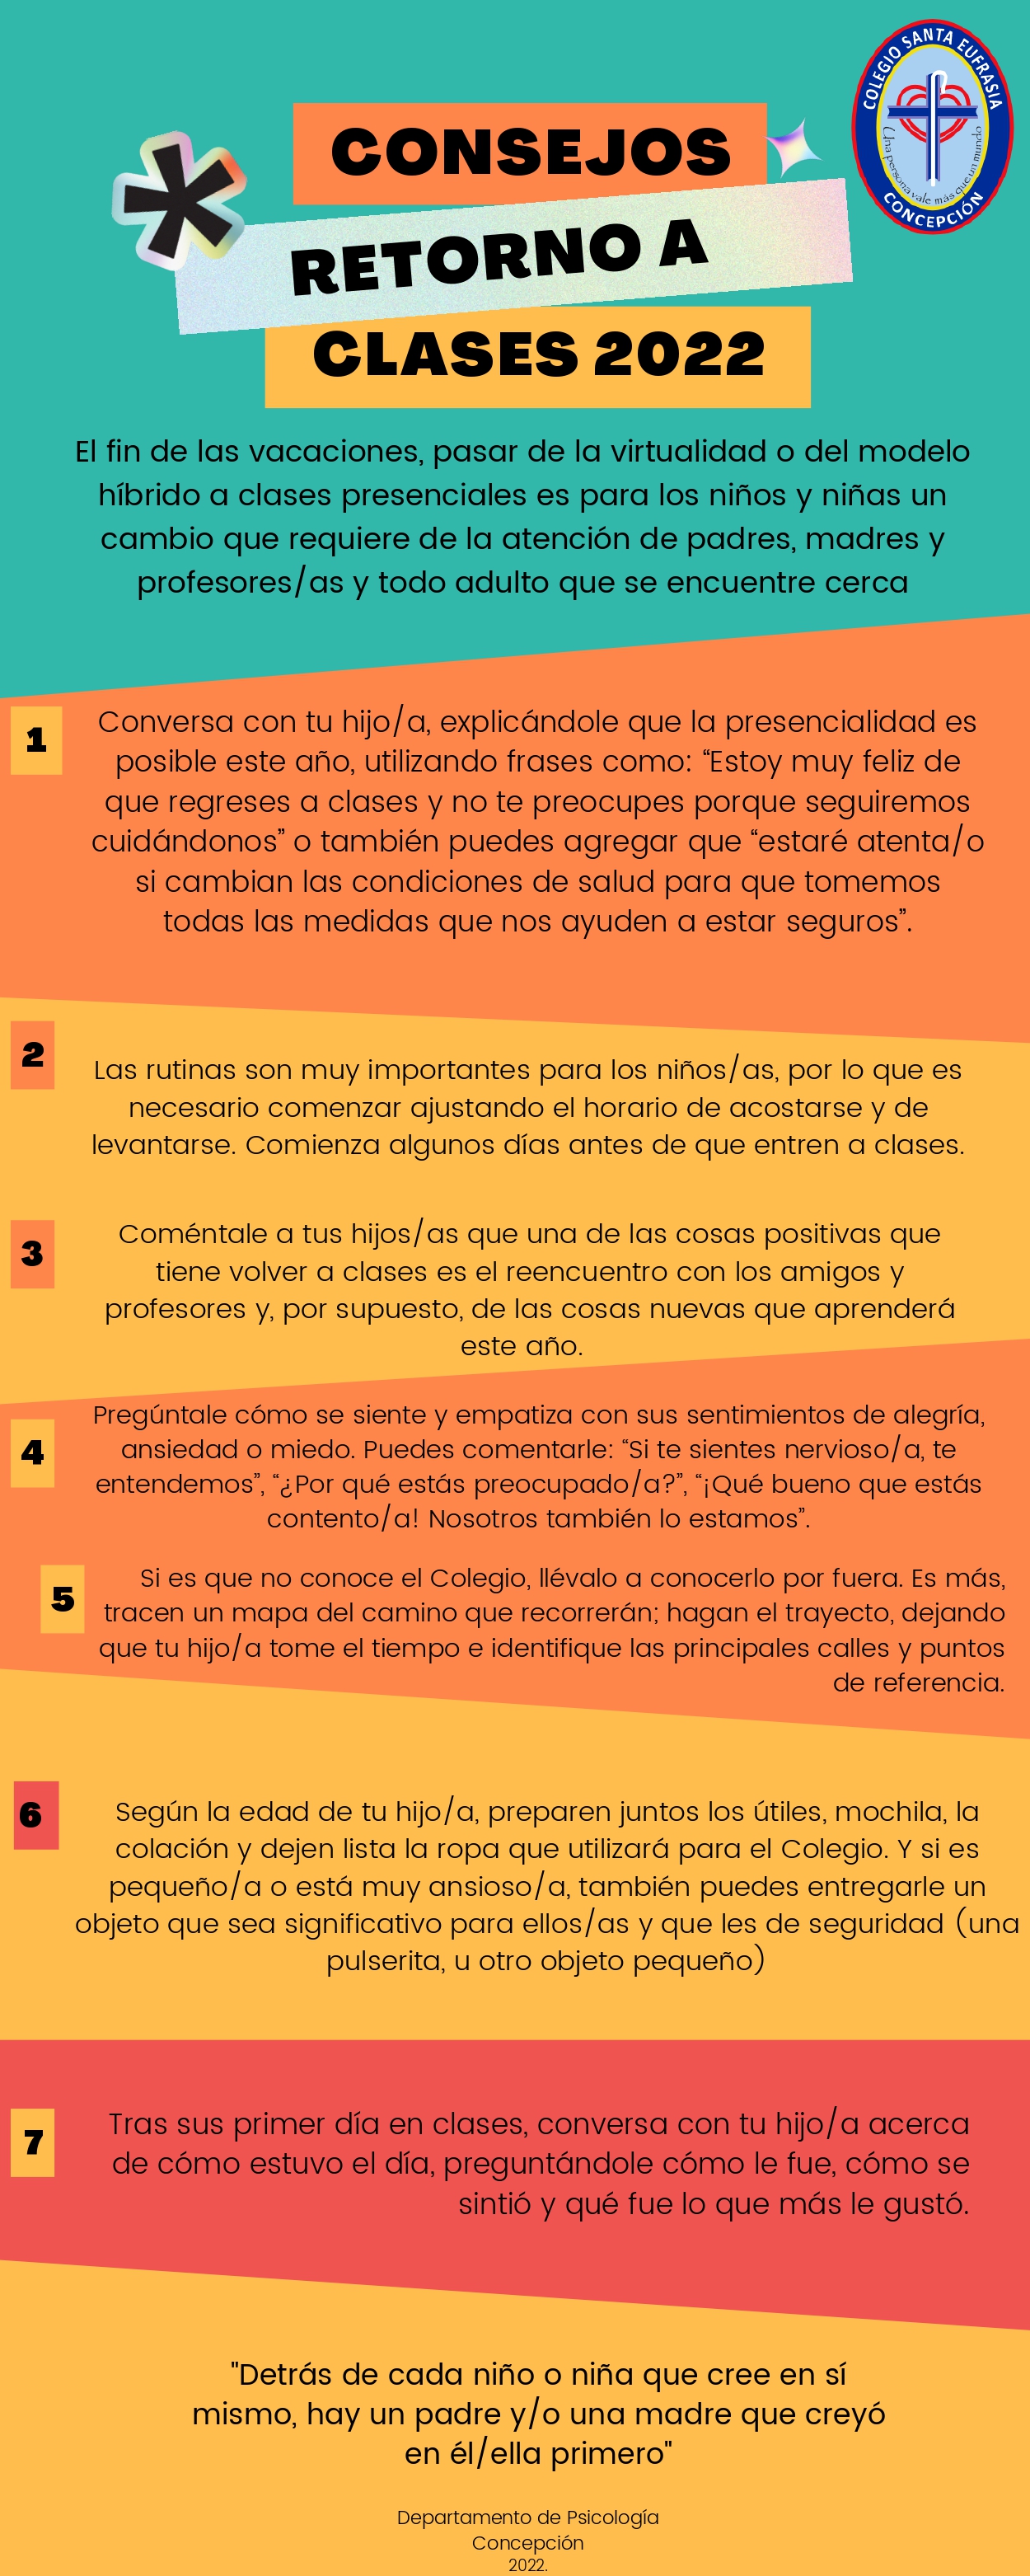 Retorno-a-clases-2022_page-0001.png